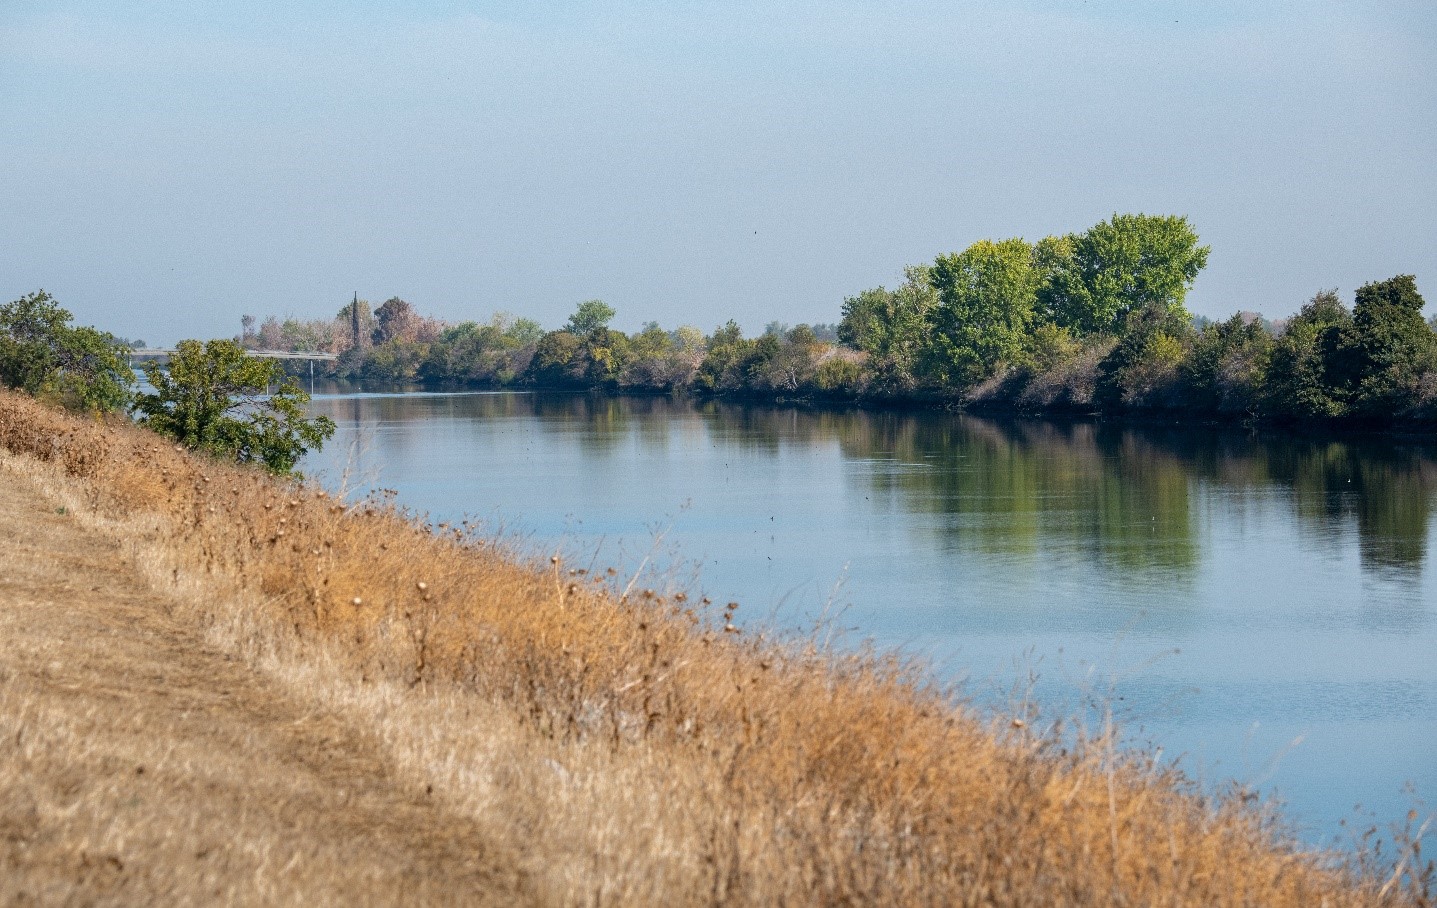 View of the Sacramento River from a dry riverbank.